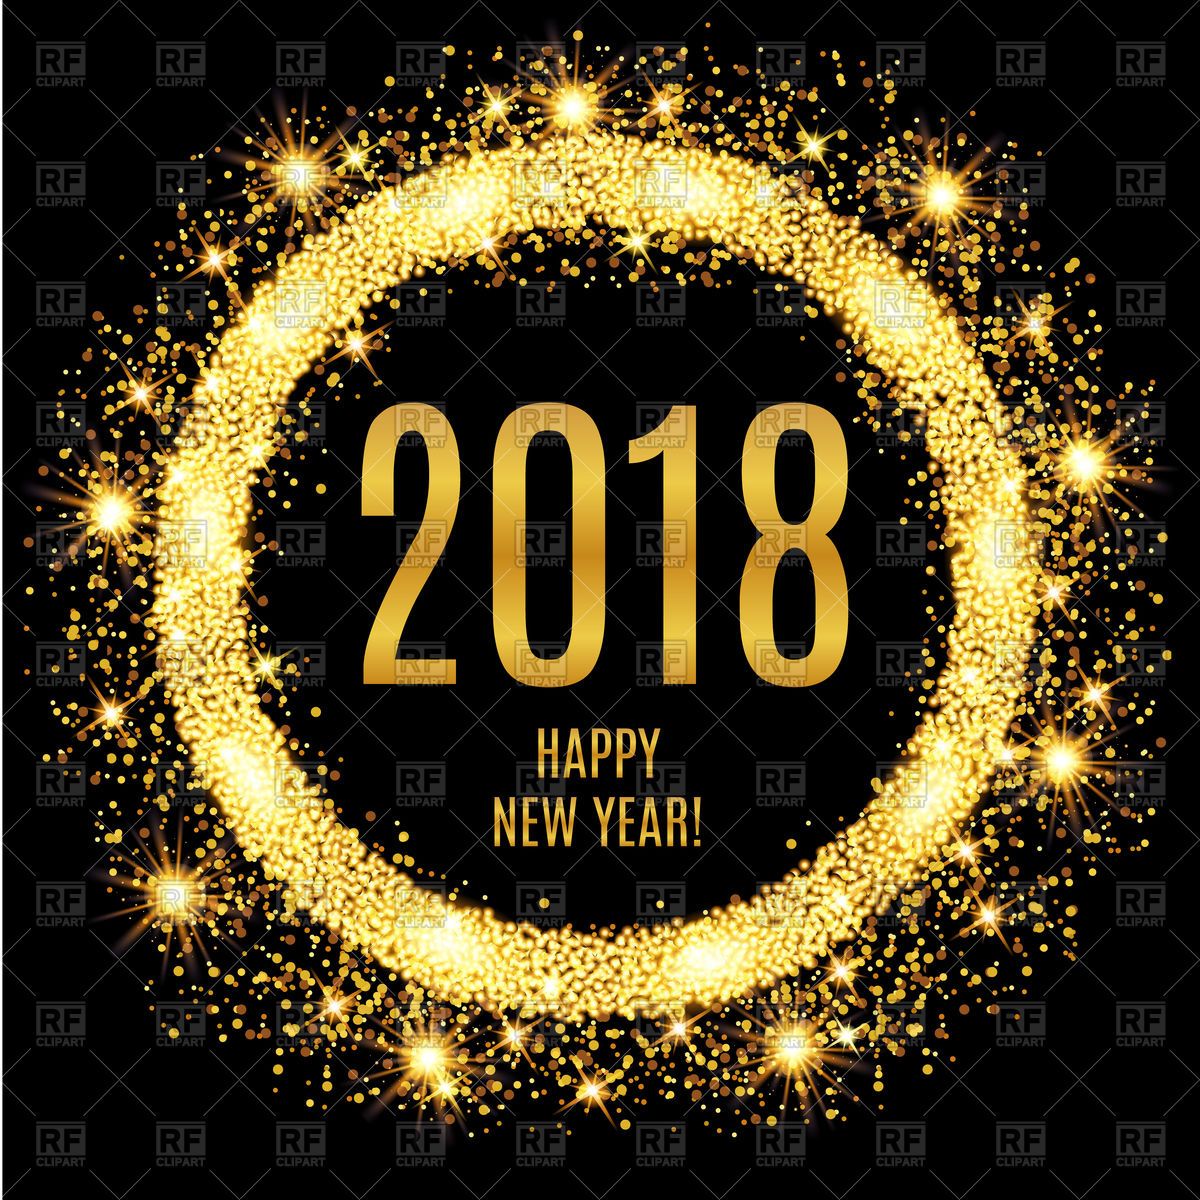 Vector Image Of Happy New Year Glowing Gold